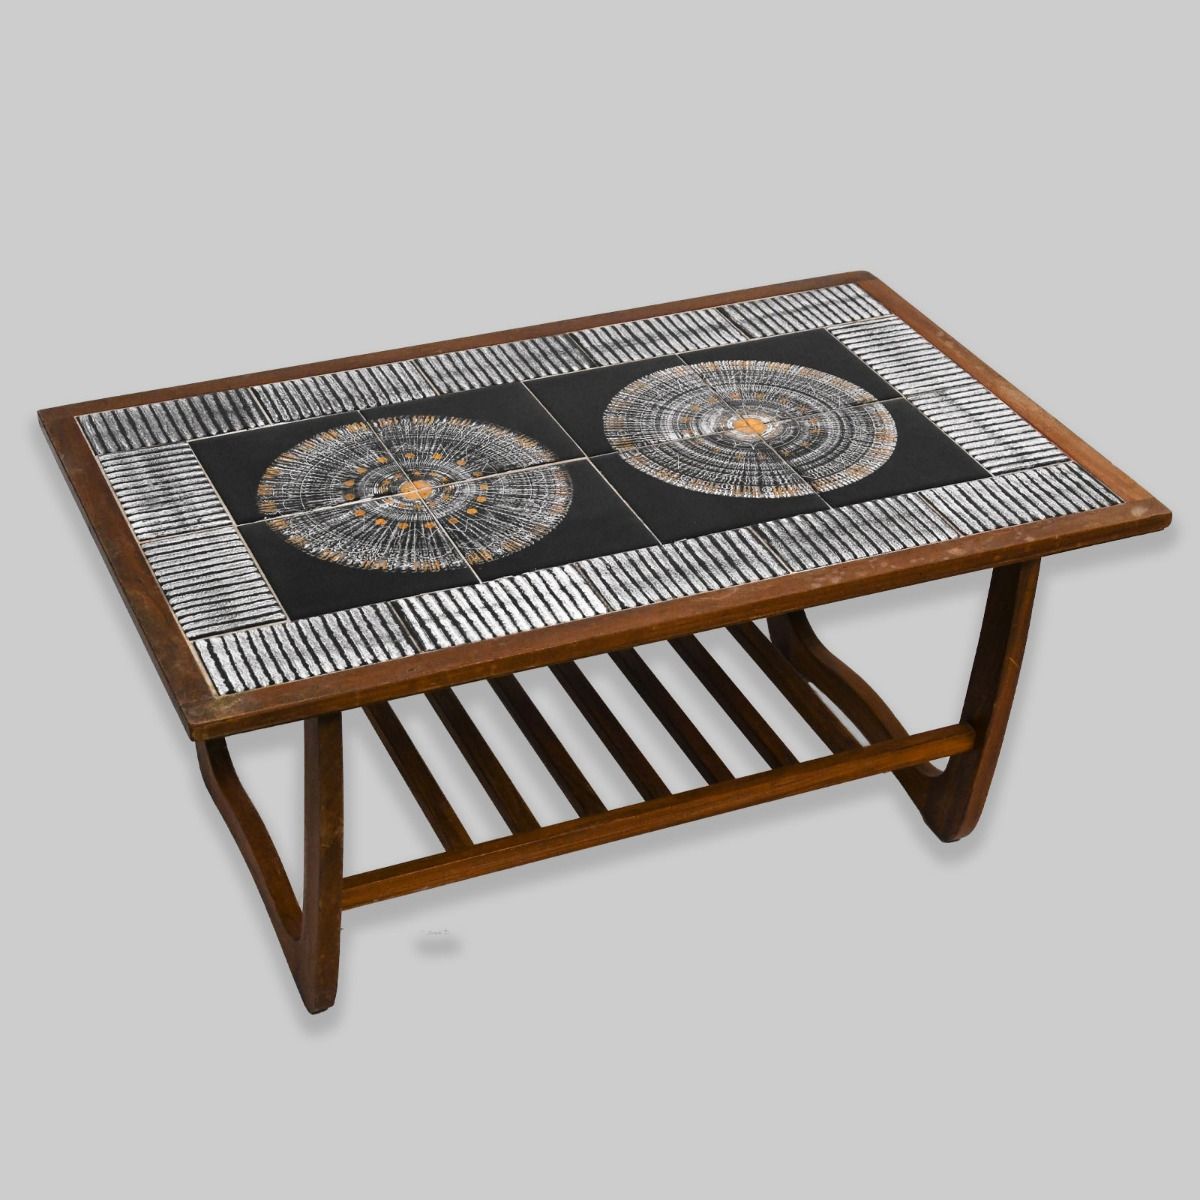 Vintage Tile Topped Coffee Table